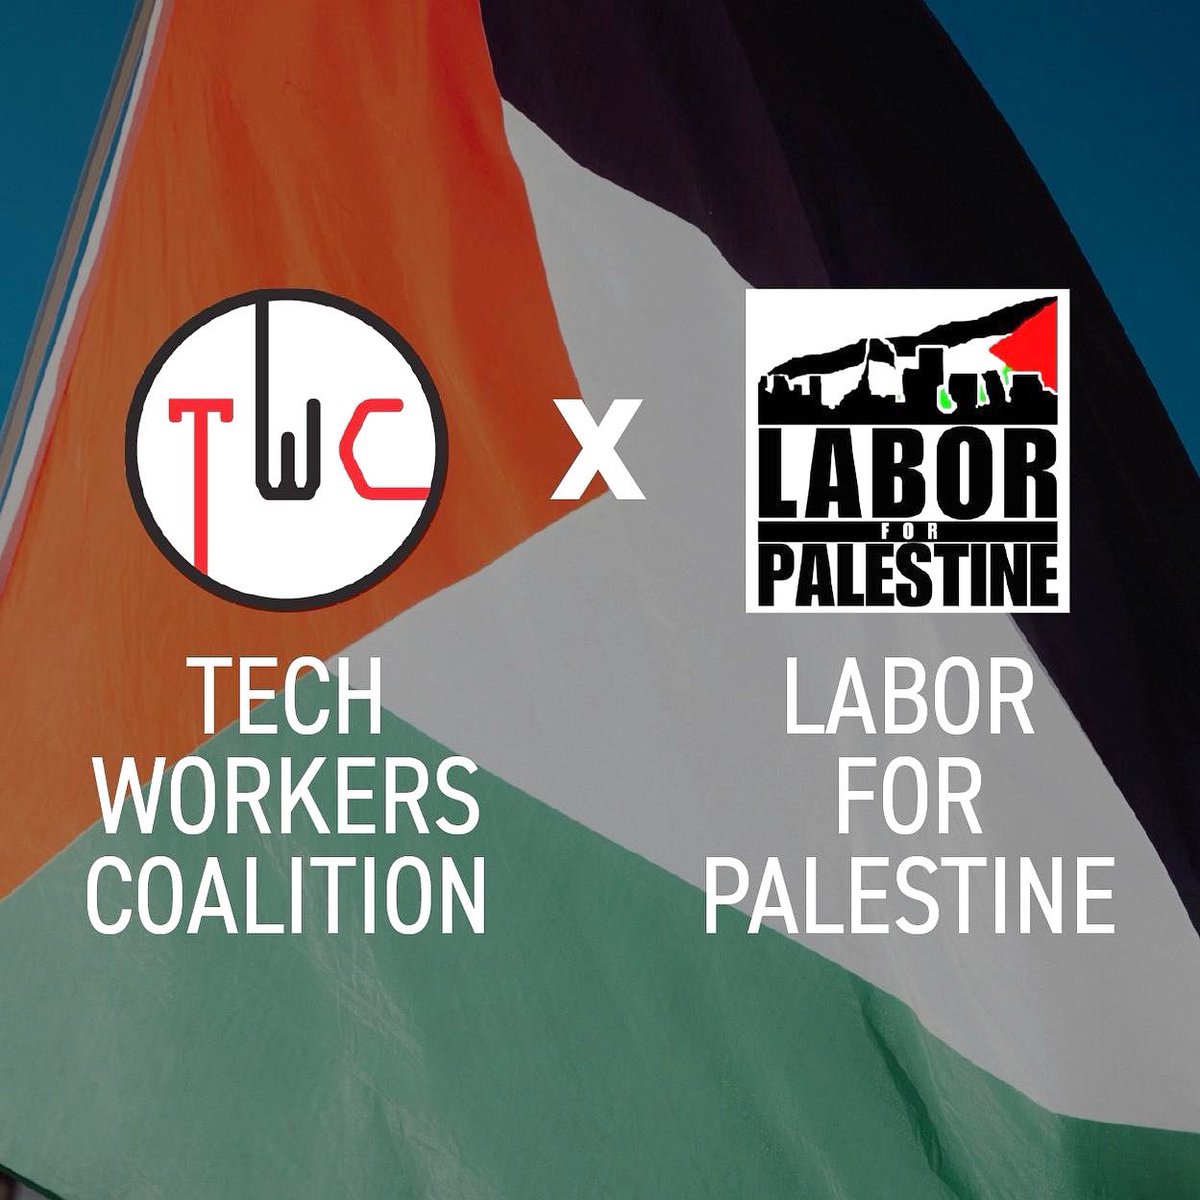 We're officially joined @Labor4Palestine, network of worker groups across sectors/communities, to heed the call from 🇵🇸 trade unions to end all complicity, stop arming Isr*el, uphold the BDS picket line Solidarity from tech workers!!